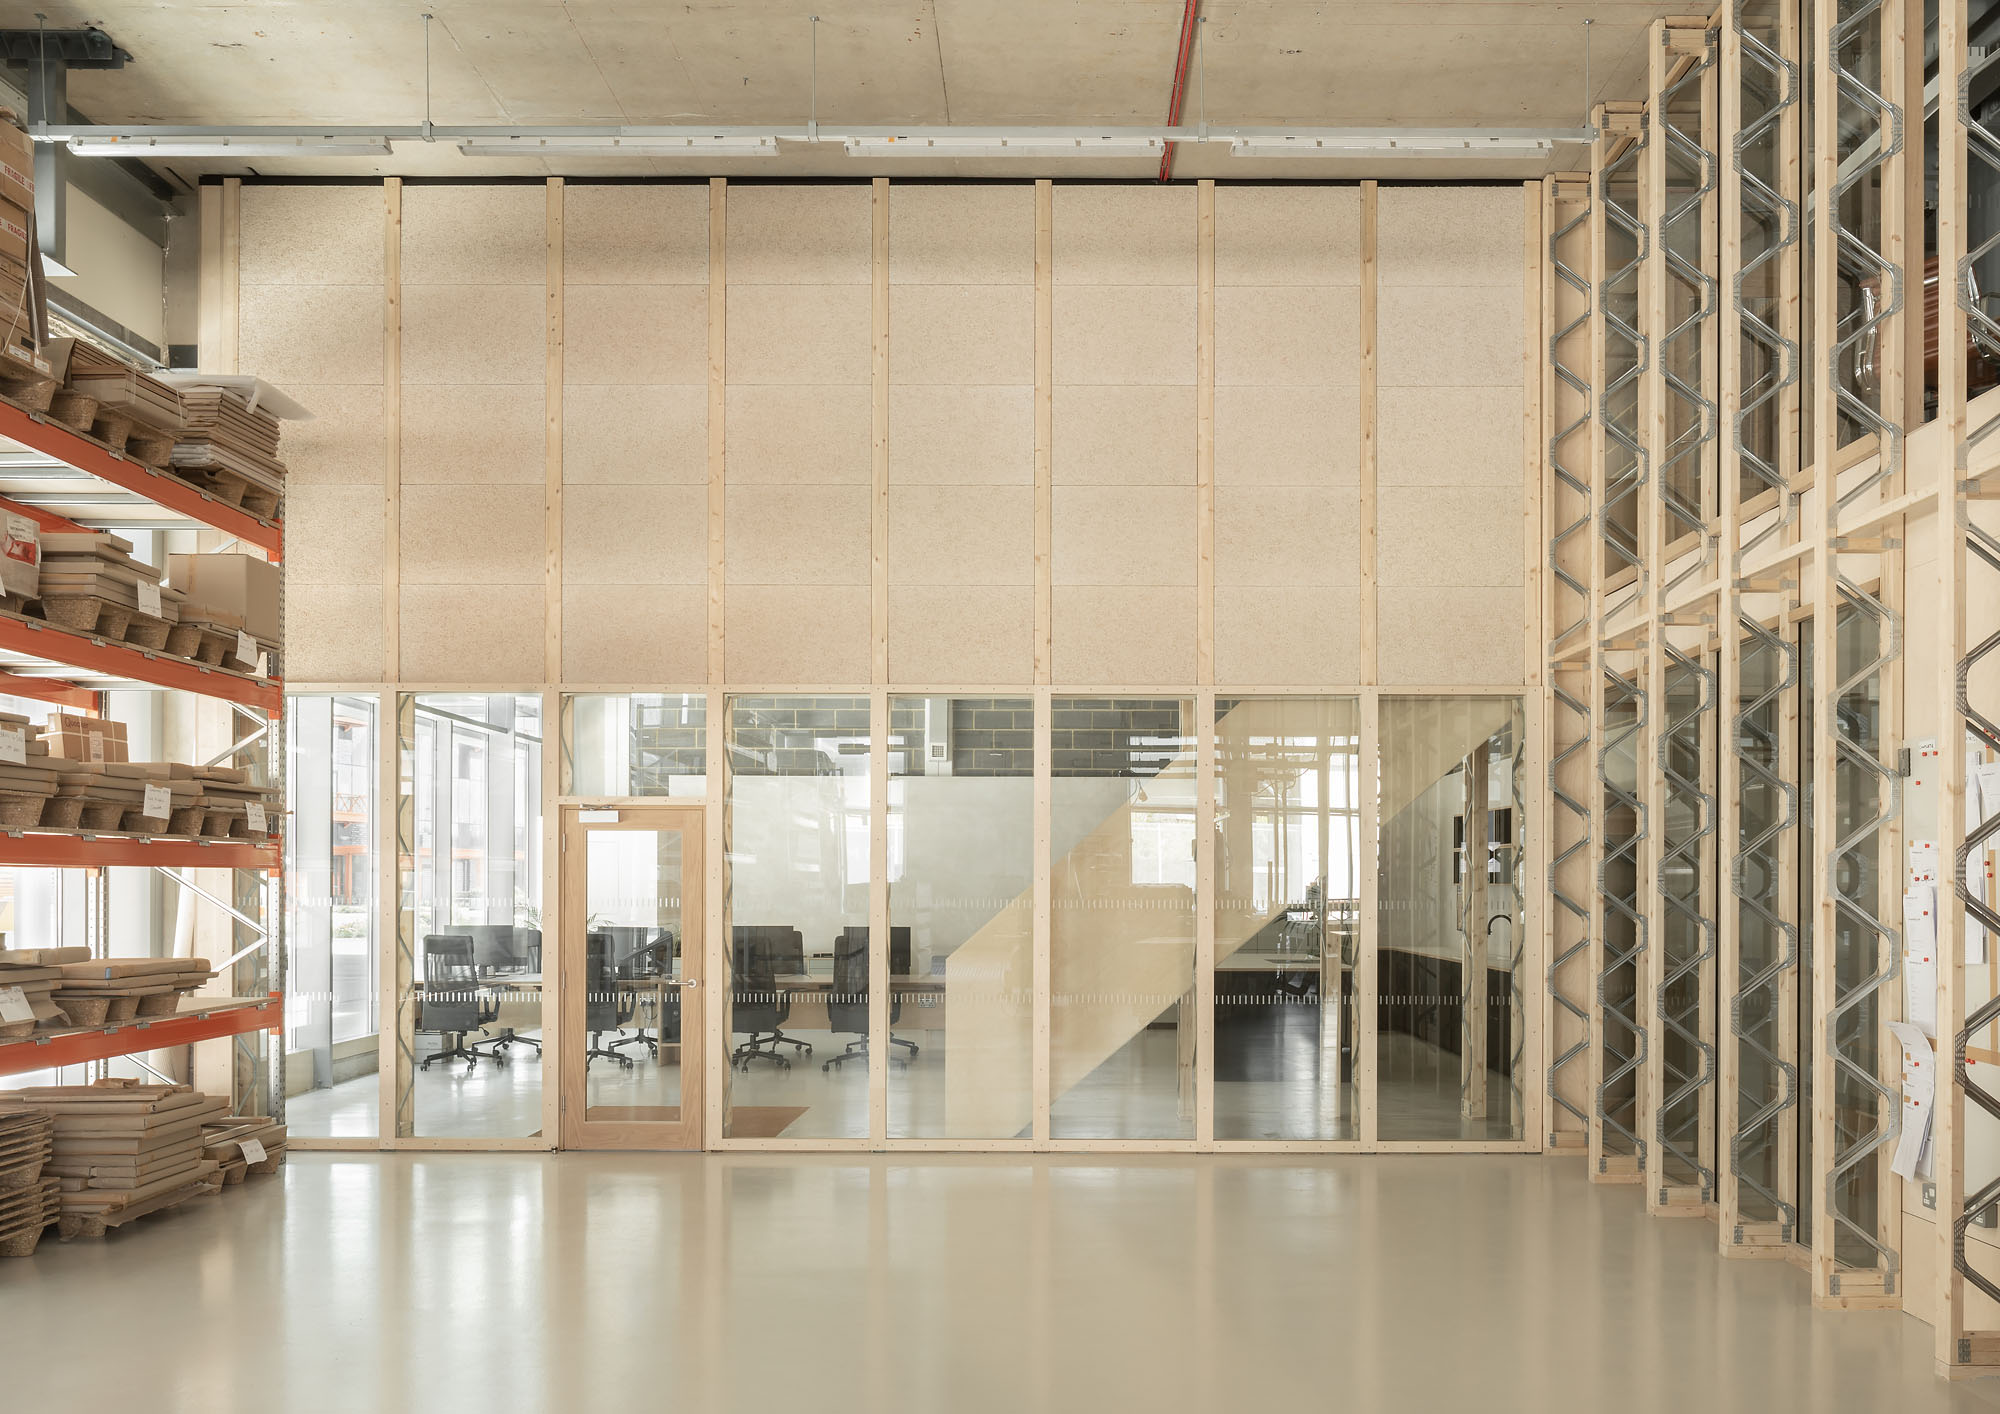 Erbar Mattes Architects Plykea workshop production space Here East London